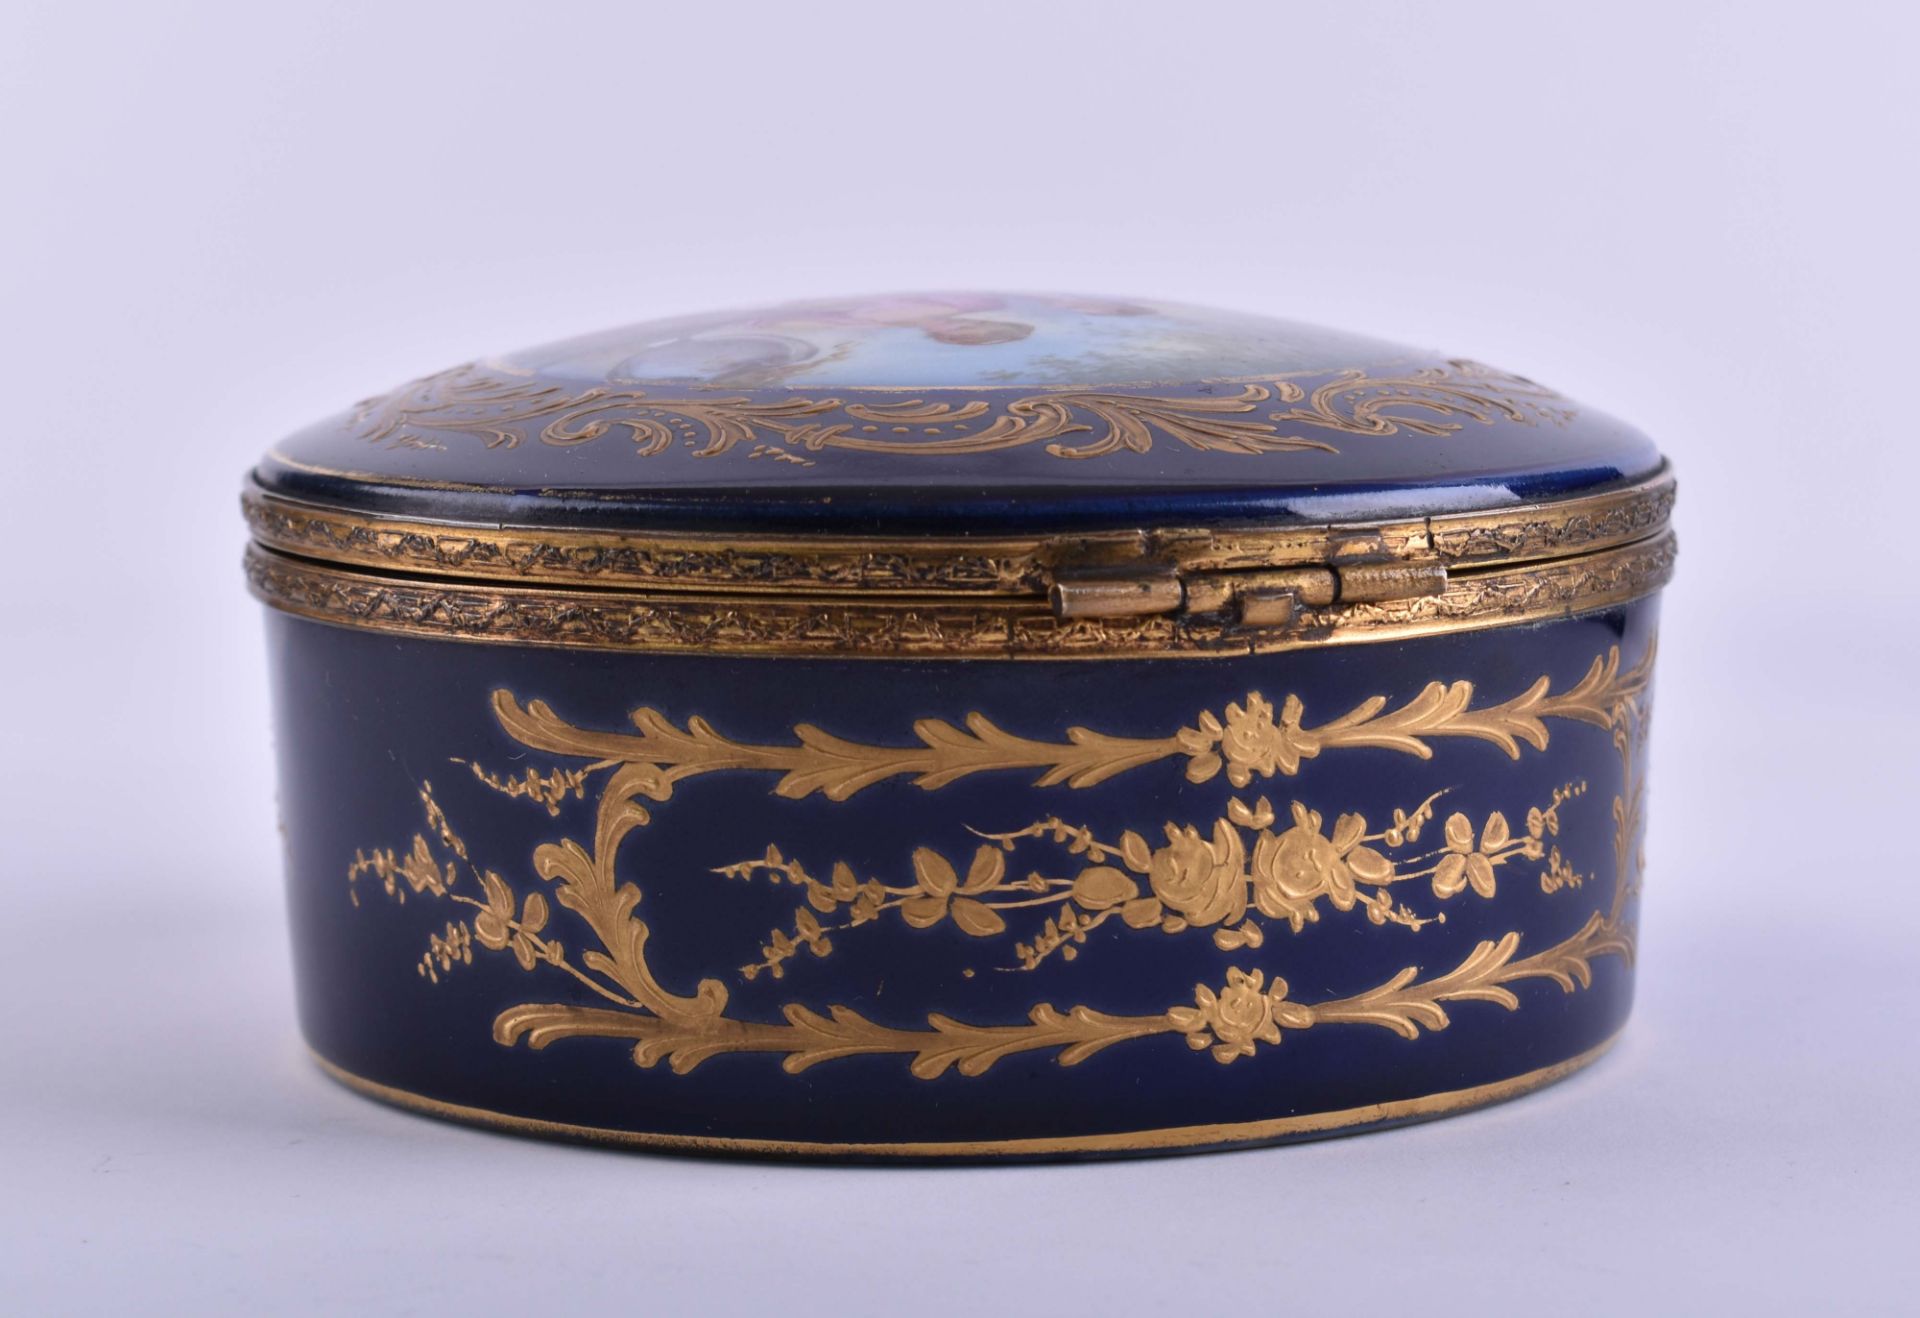  Porcelain cover box Sevres - Image 5 of 7